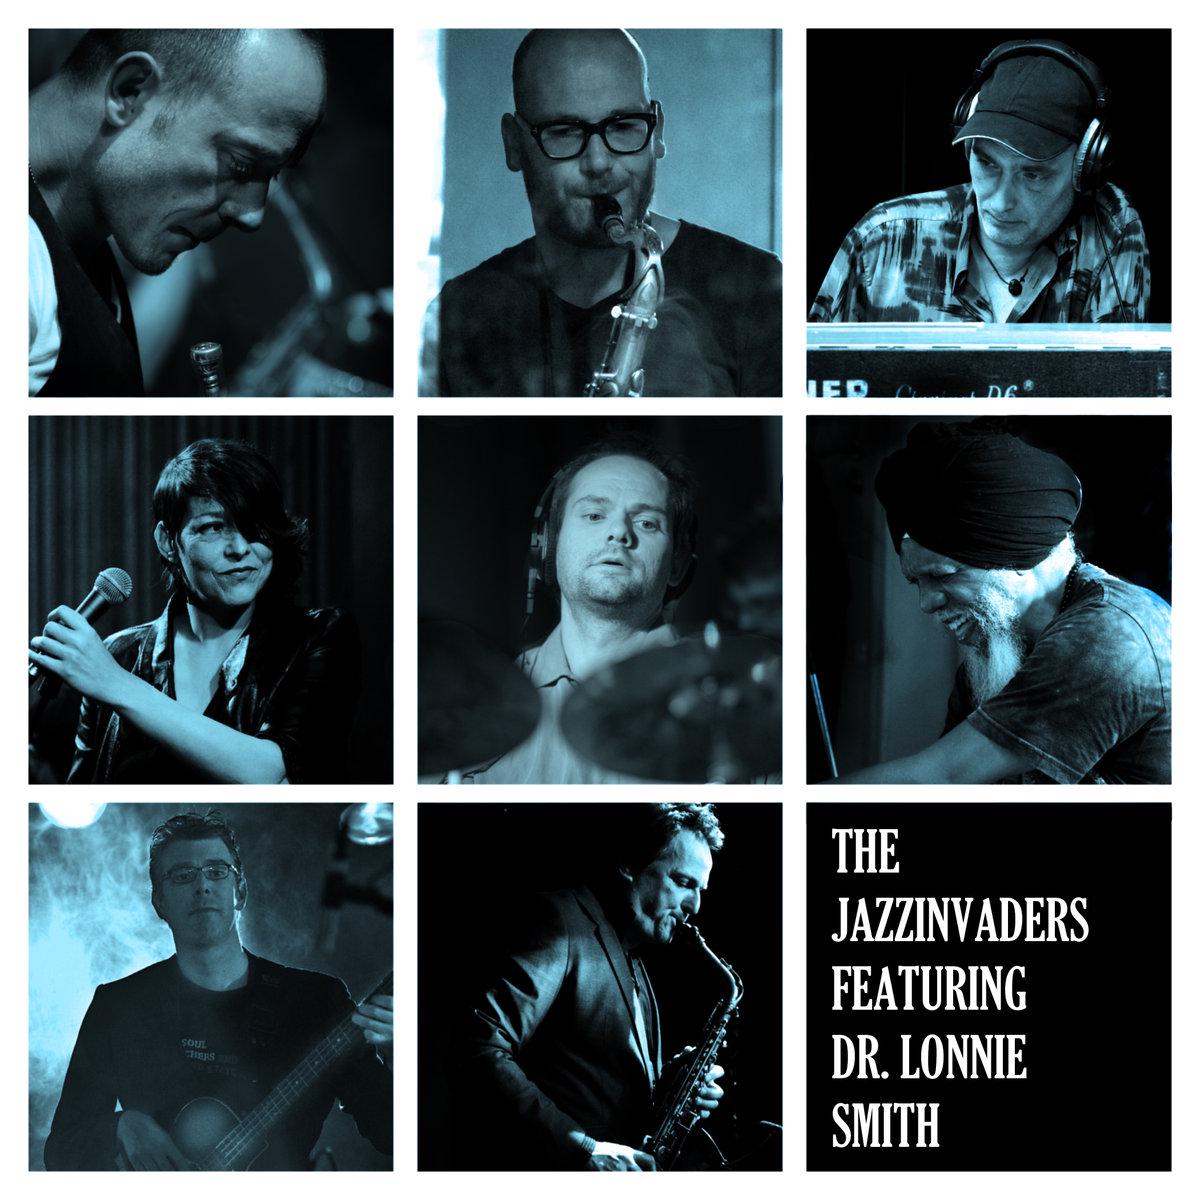 The Jazzinvaders